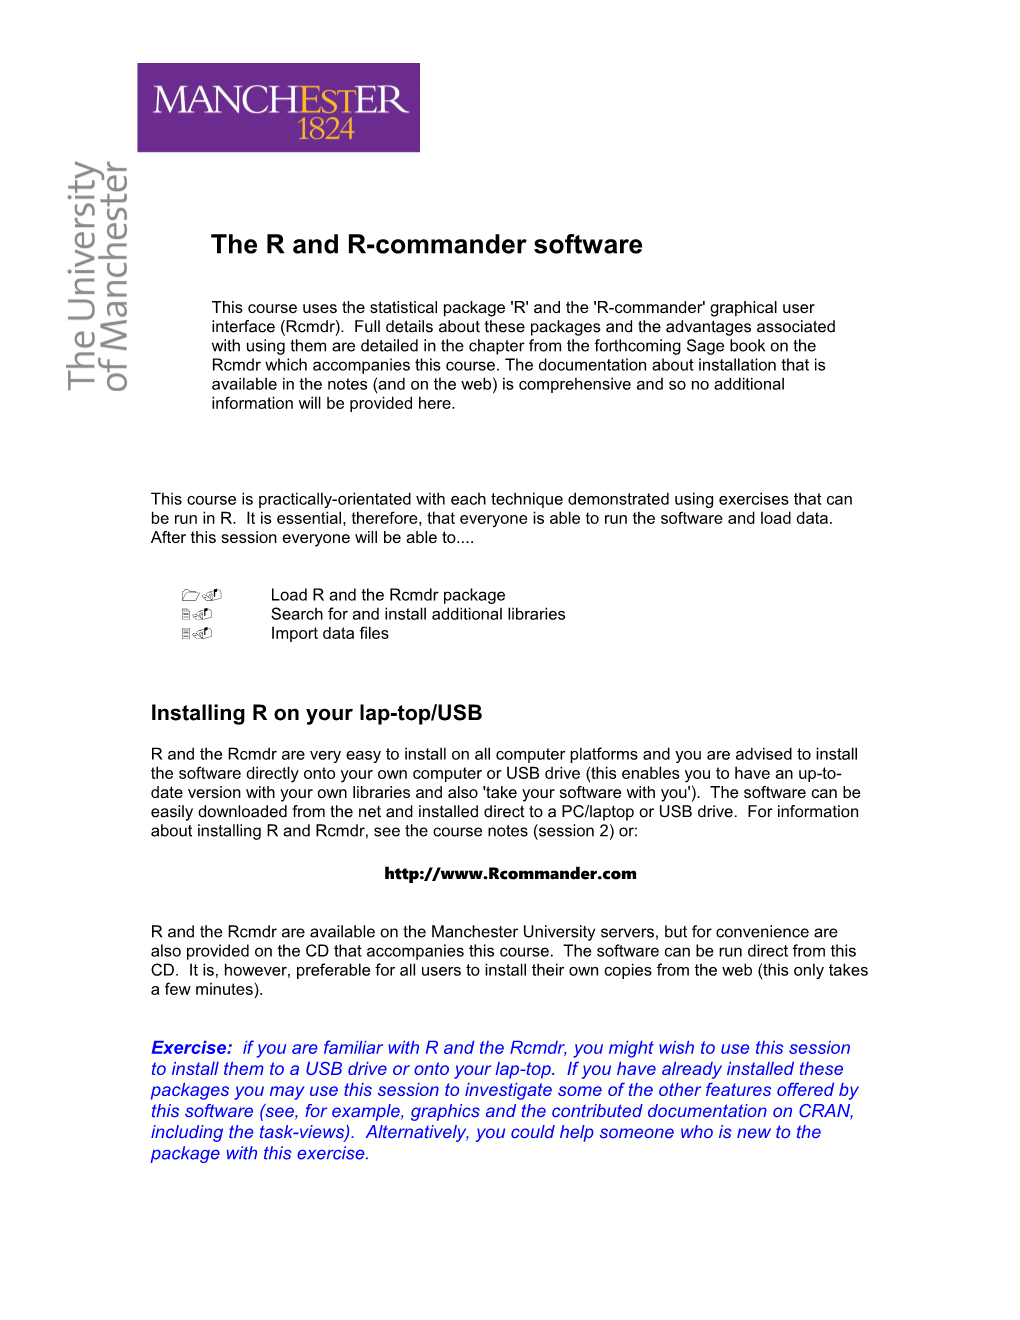 The R and R-Commander Software